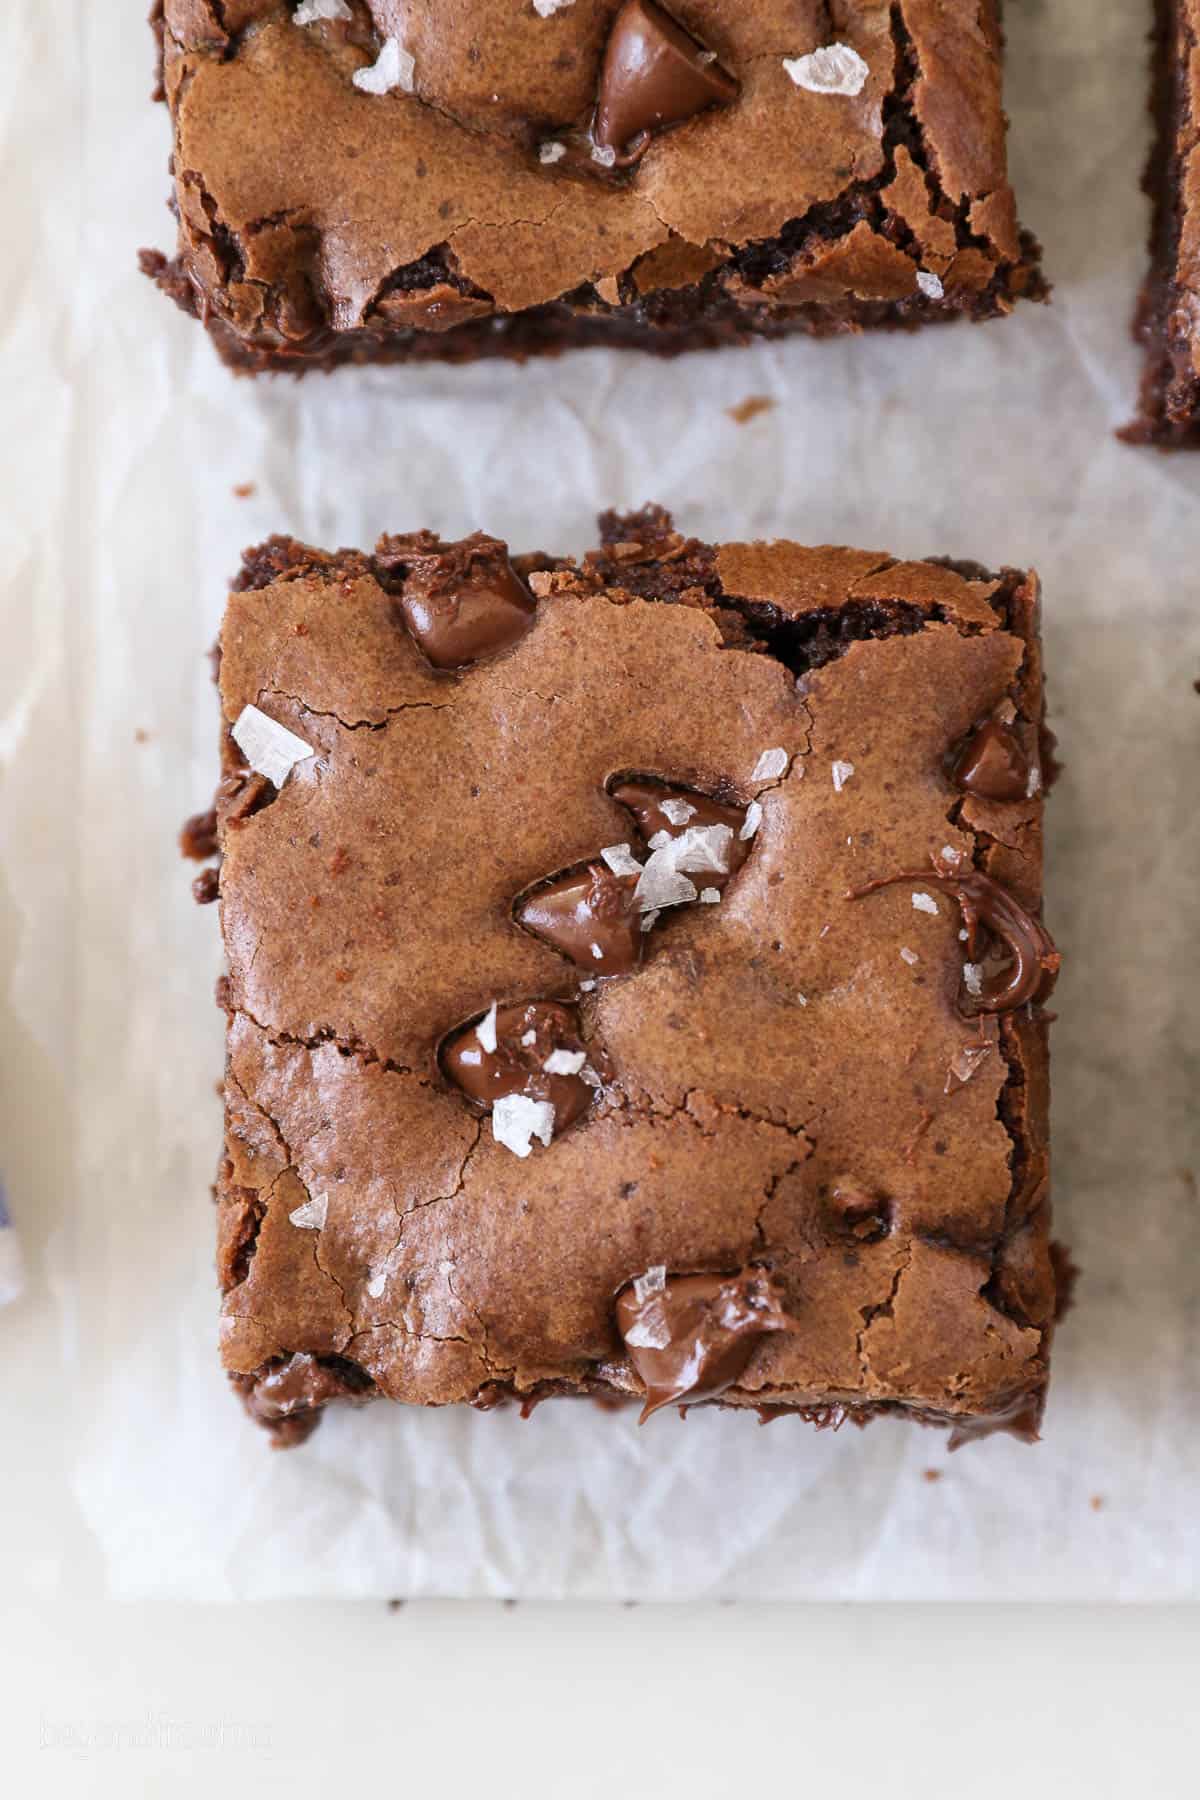 Overhead view of a brownie with sea salt